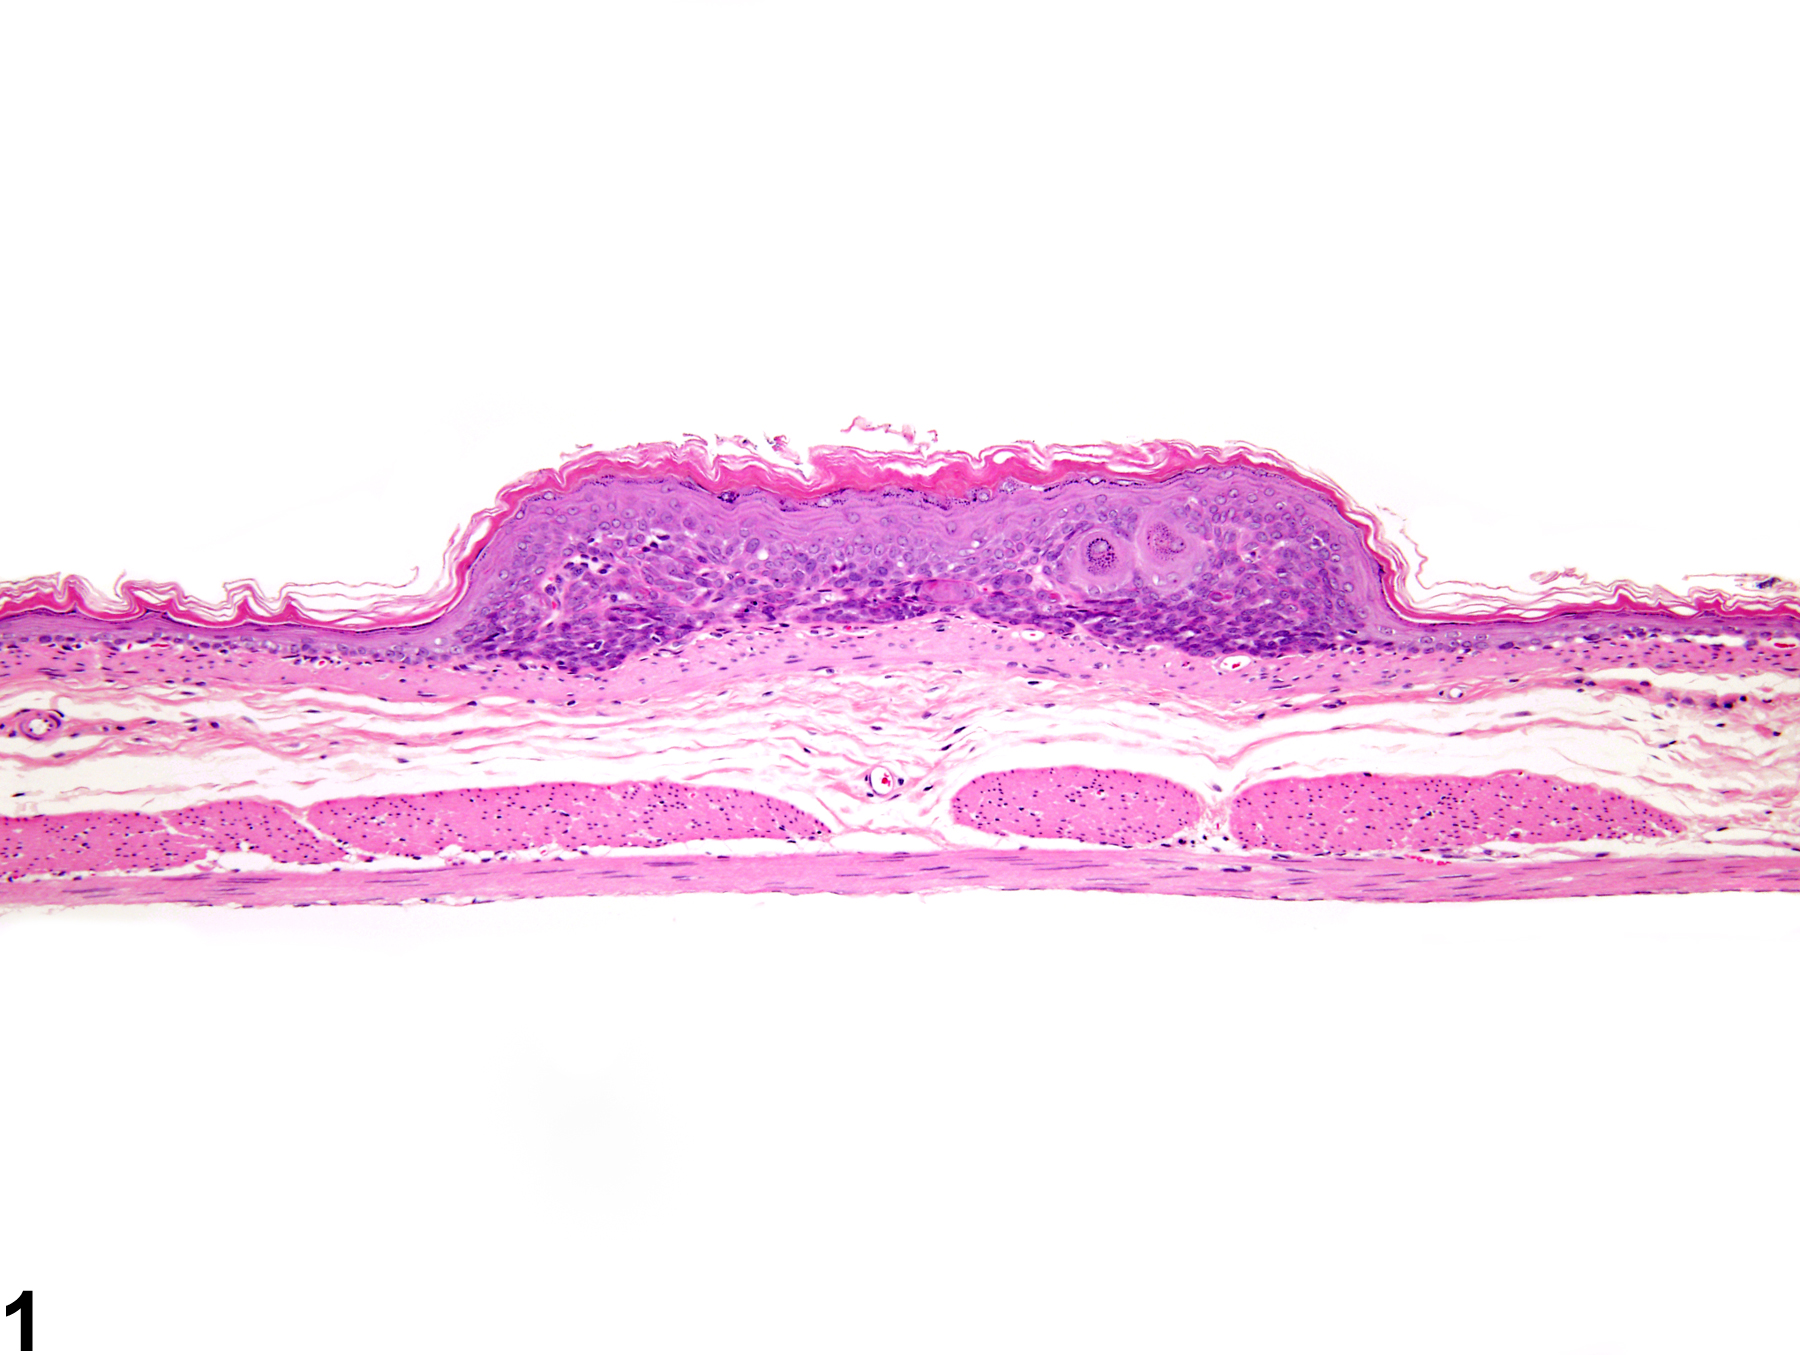 Image of hyperplasia, atypical in the forestomach epithelium from a female F344/N rat in a subchronic study